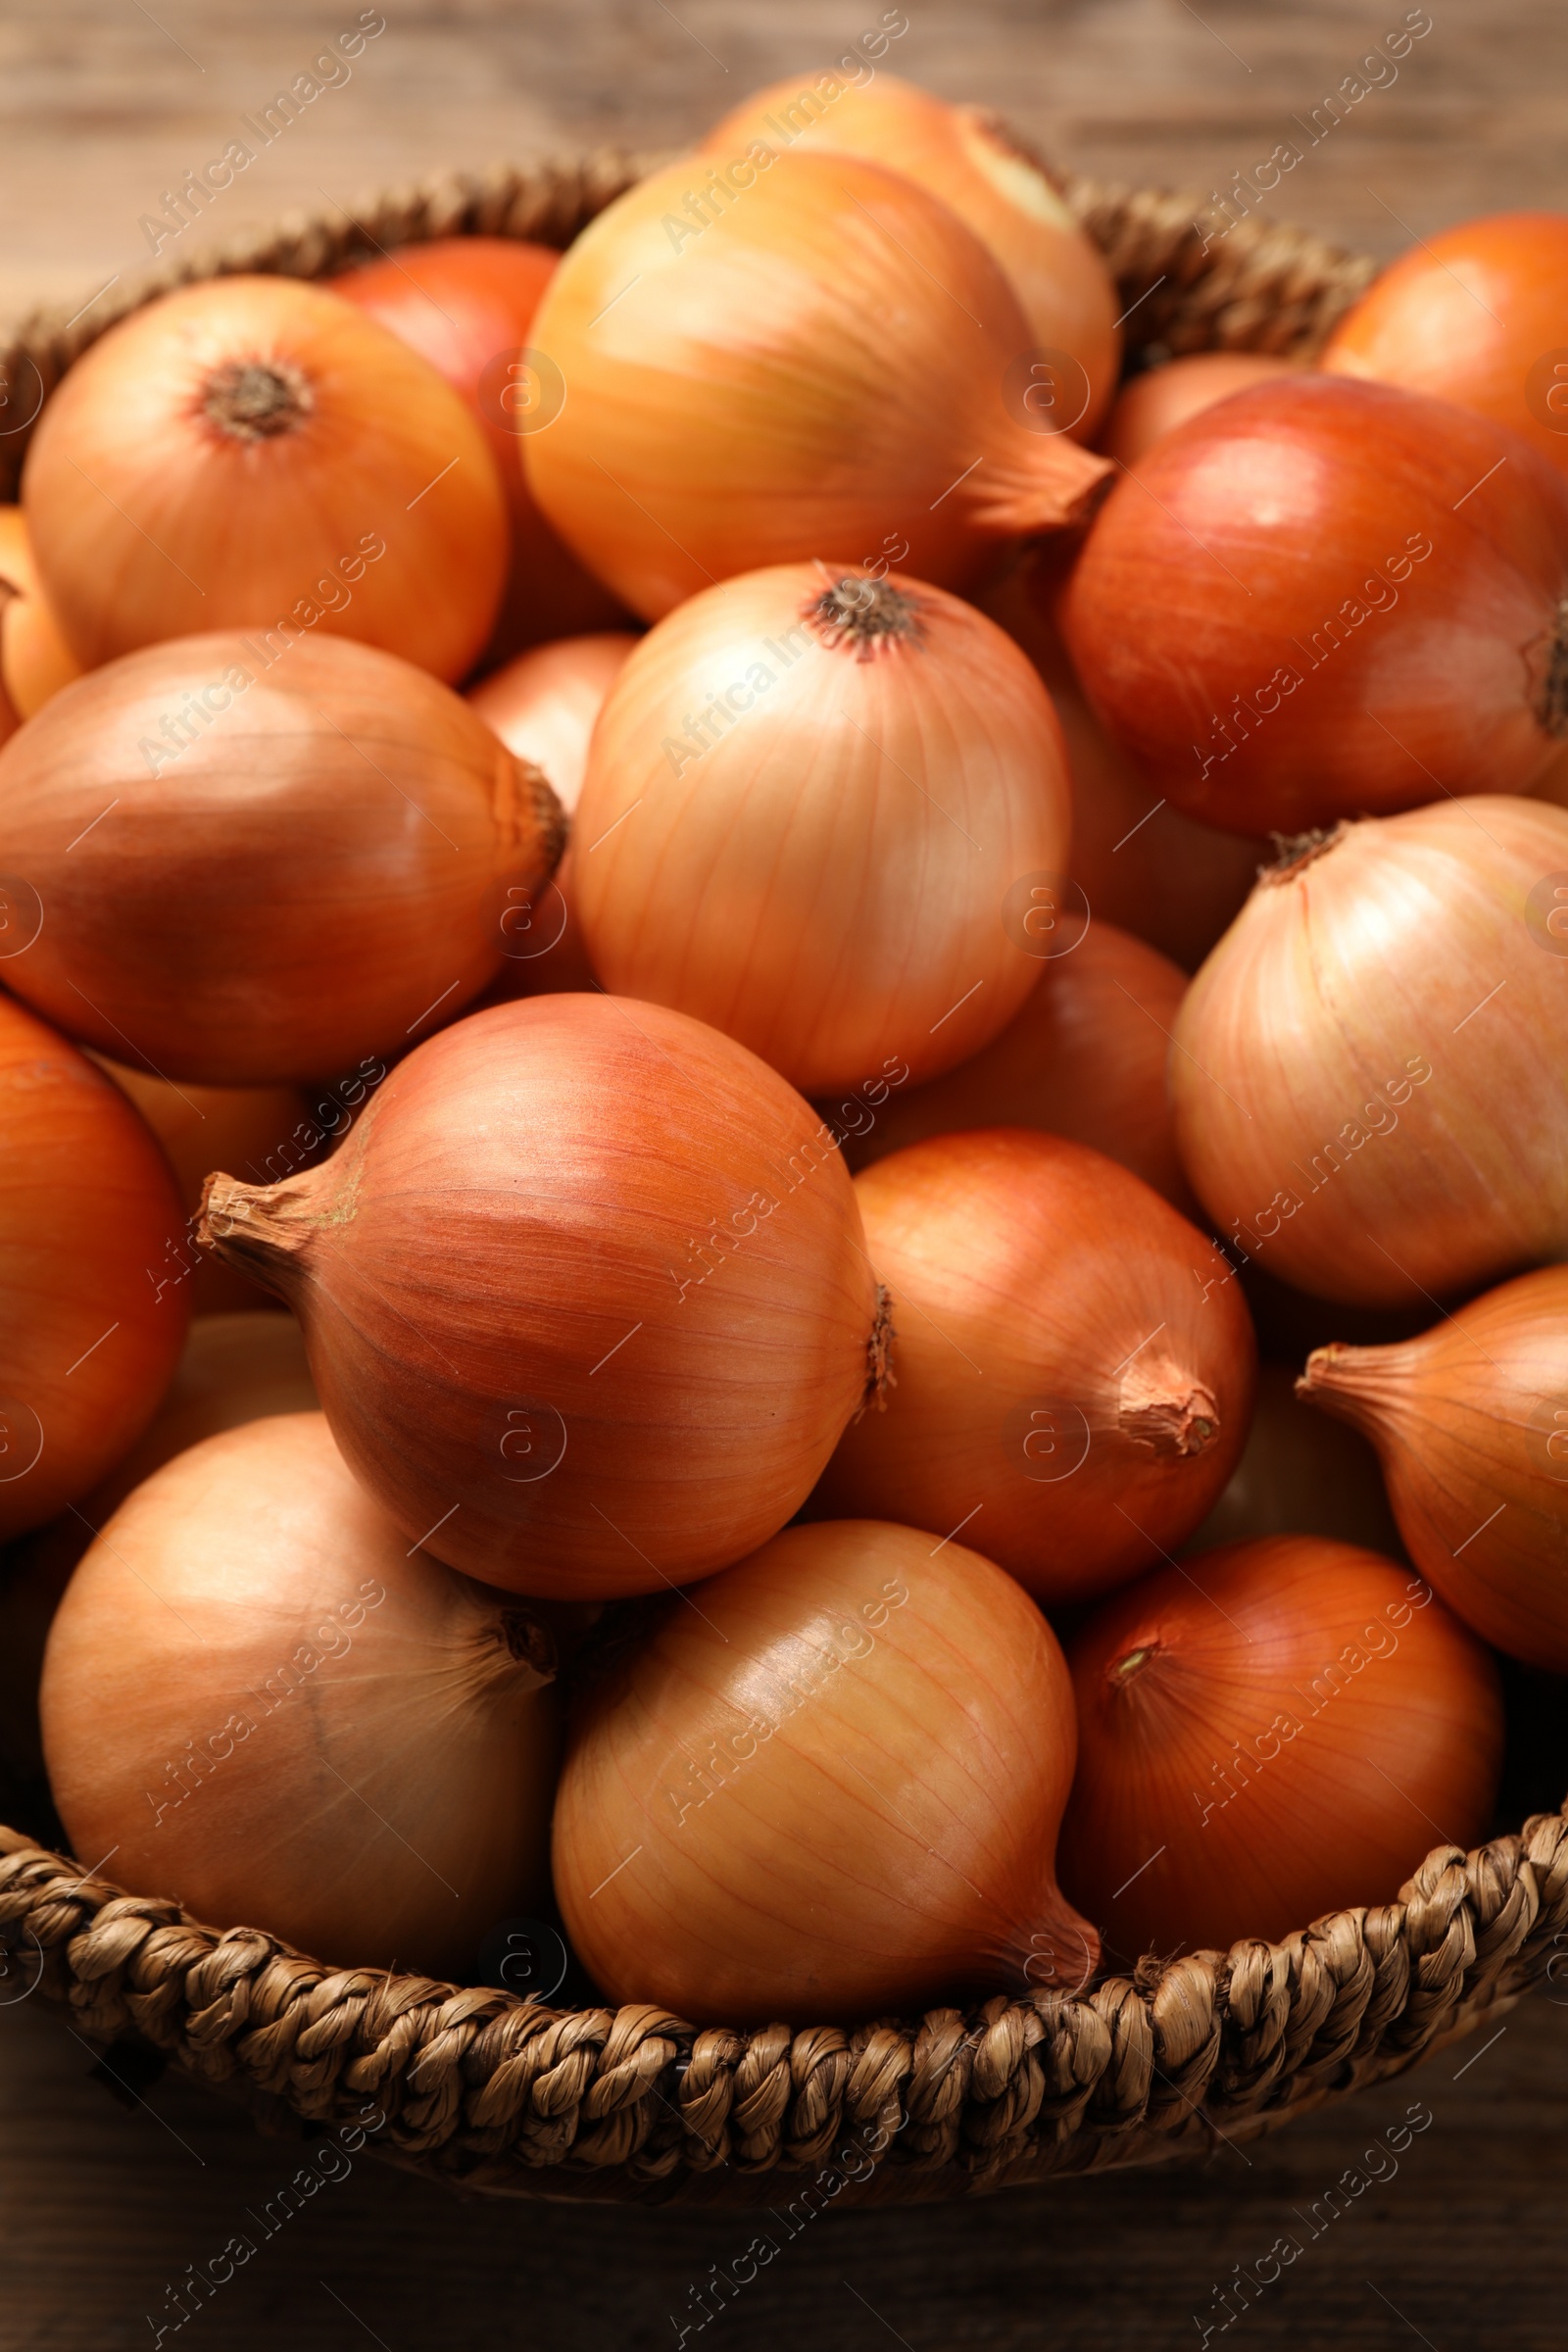 Photo of Wicker basket with many ripe onions on table, closeup